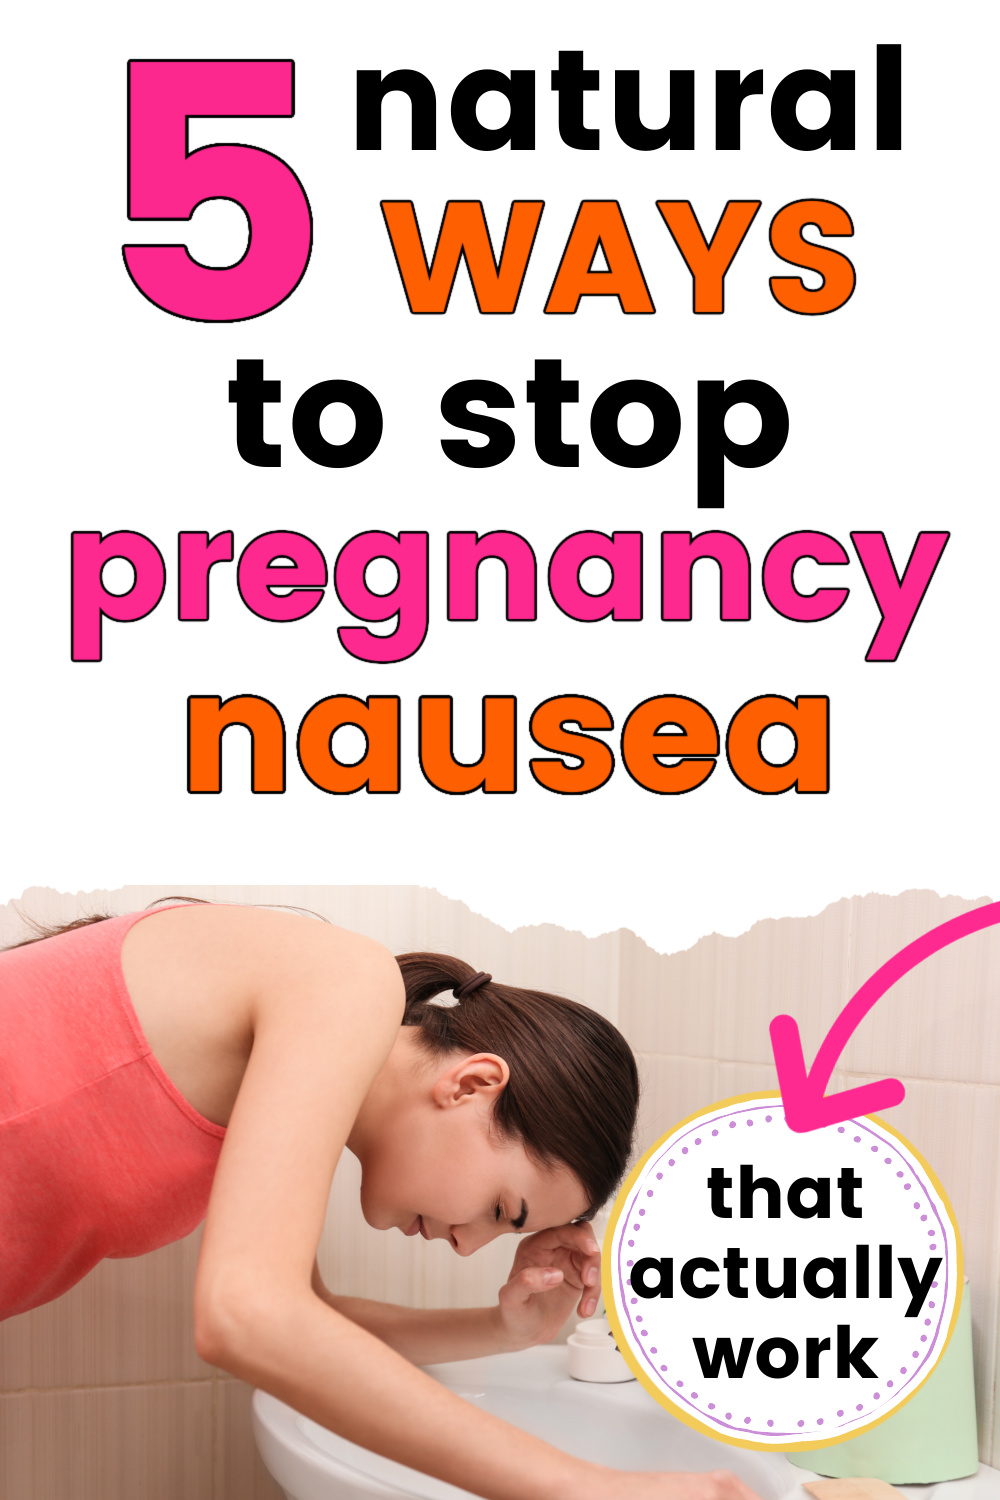 pregnant woman feeling nauseous, bent over bathroom sink, with text overlay, "5 natural ways to stop pregnancy nausea".